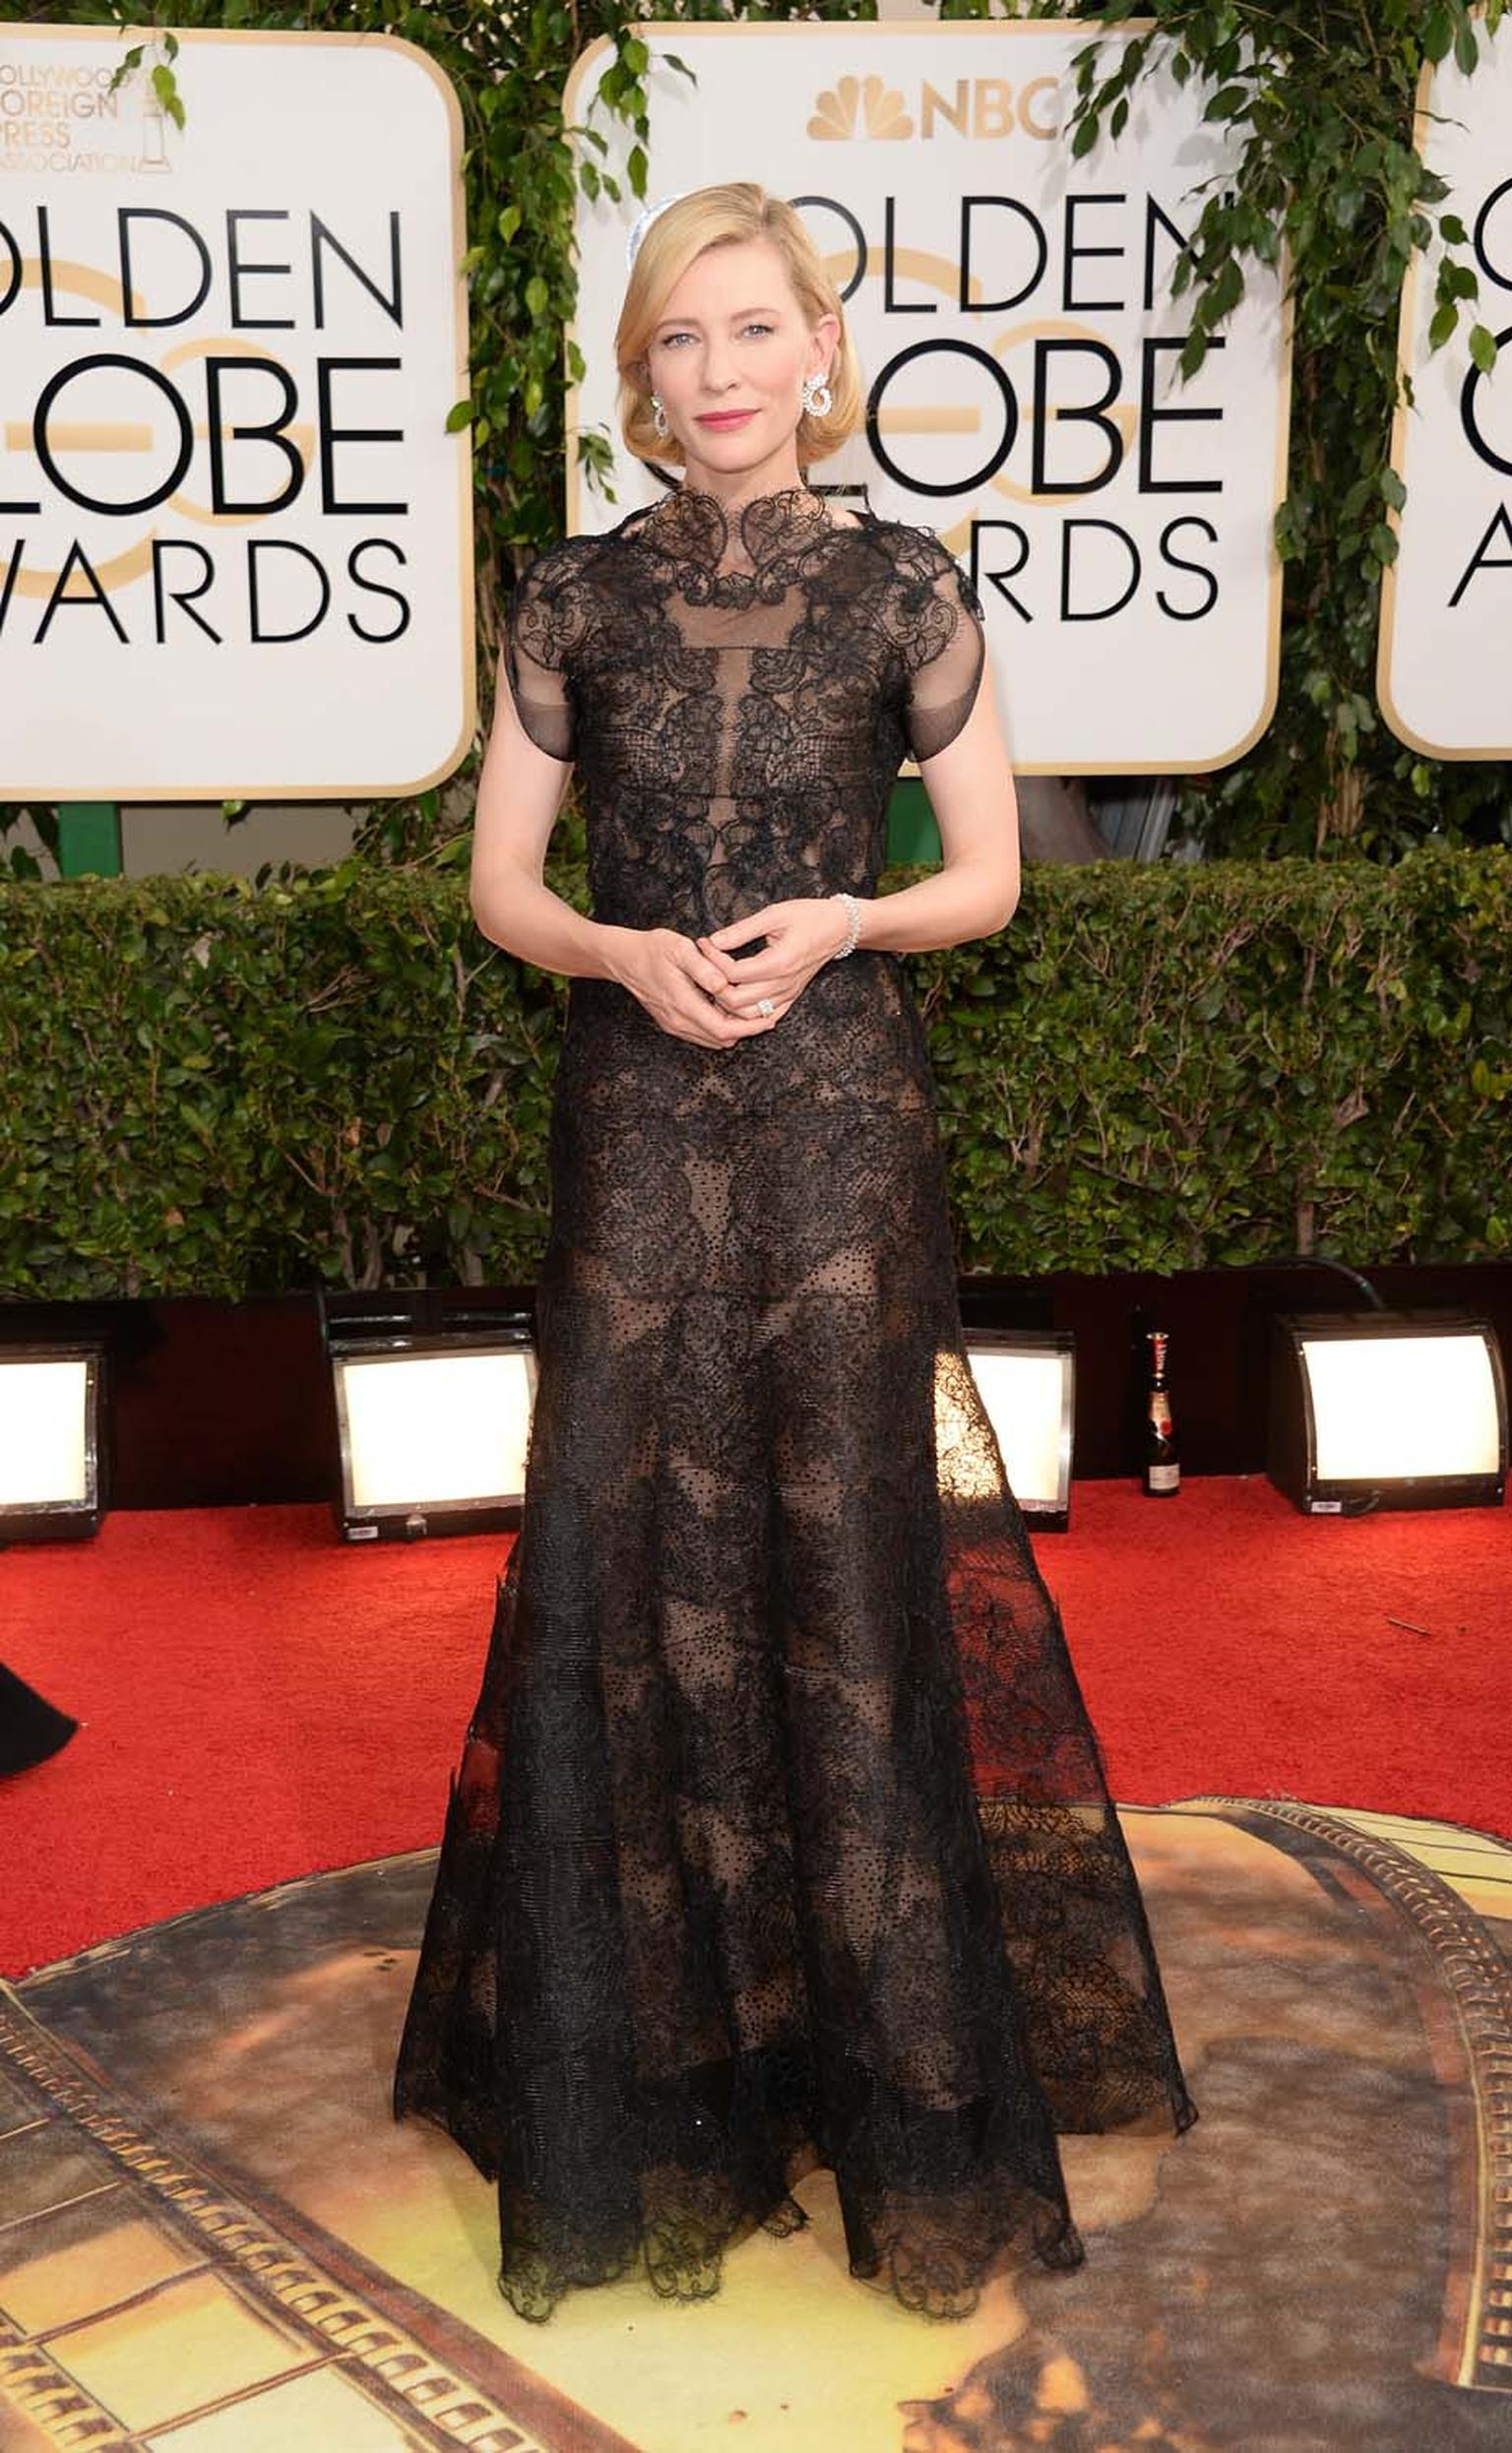 Golden Globes 2014: the best of the red carpet jewels | The Jewellery Editor